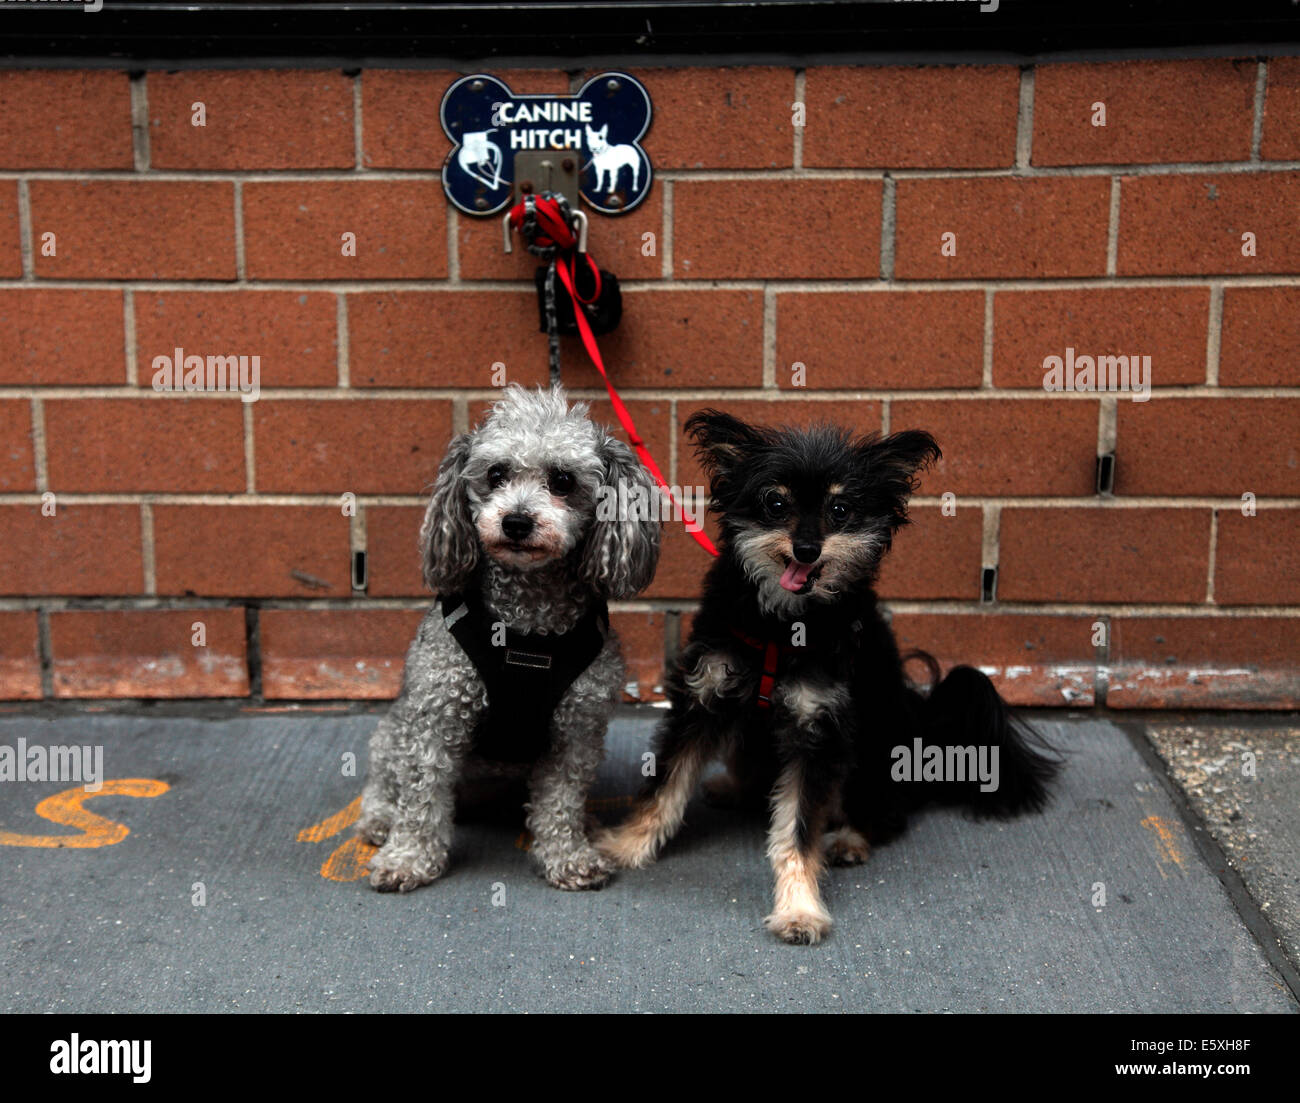 Two dogs tethered to Downtown NYC Starbucks canine hitching post Stock Photo